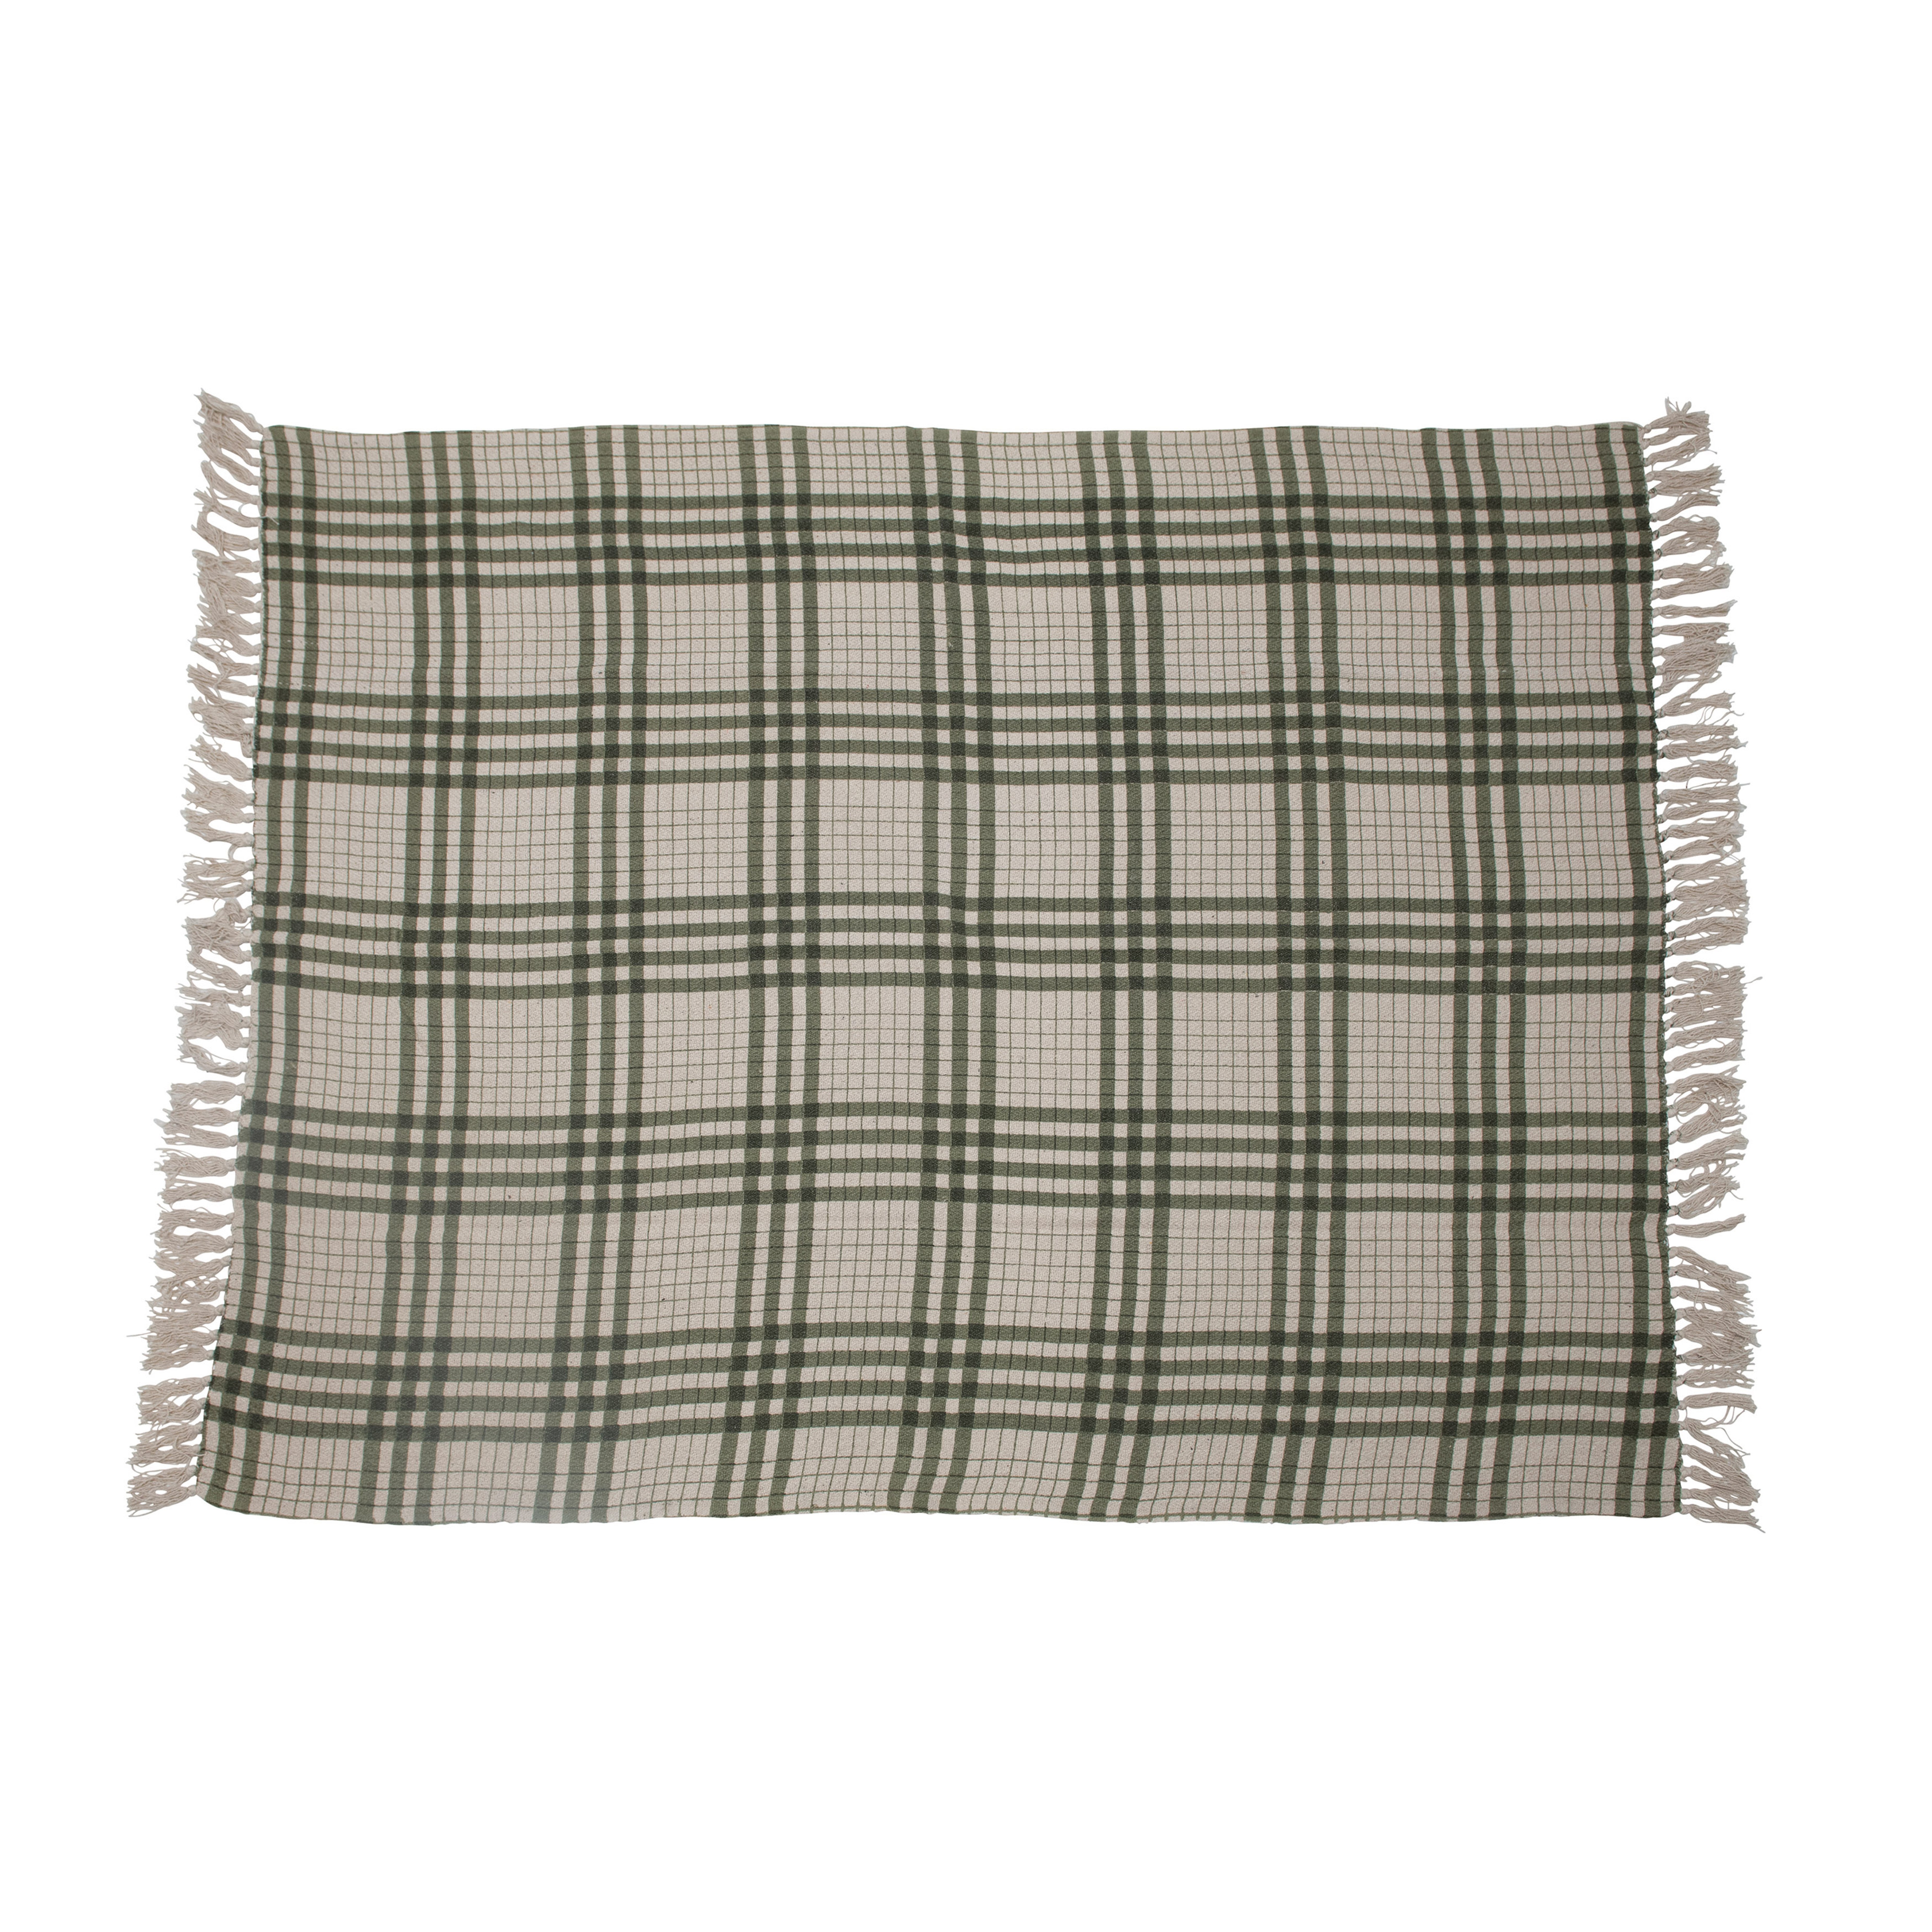 Recycled Cotton Printed Plaid Throw Blanket, Green - Nomad Home